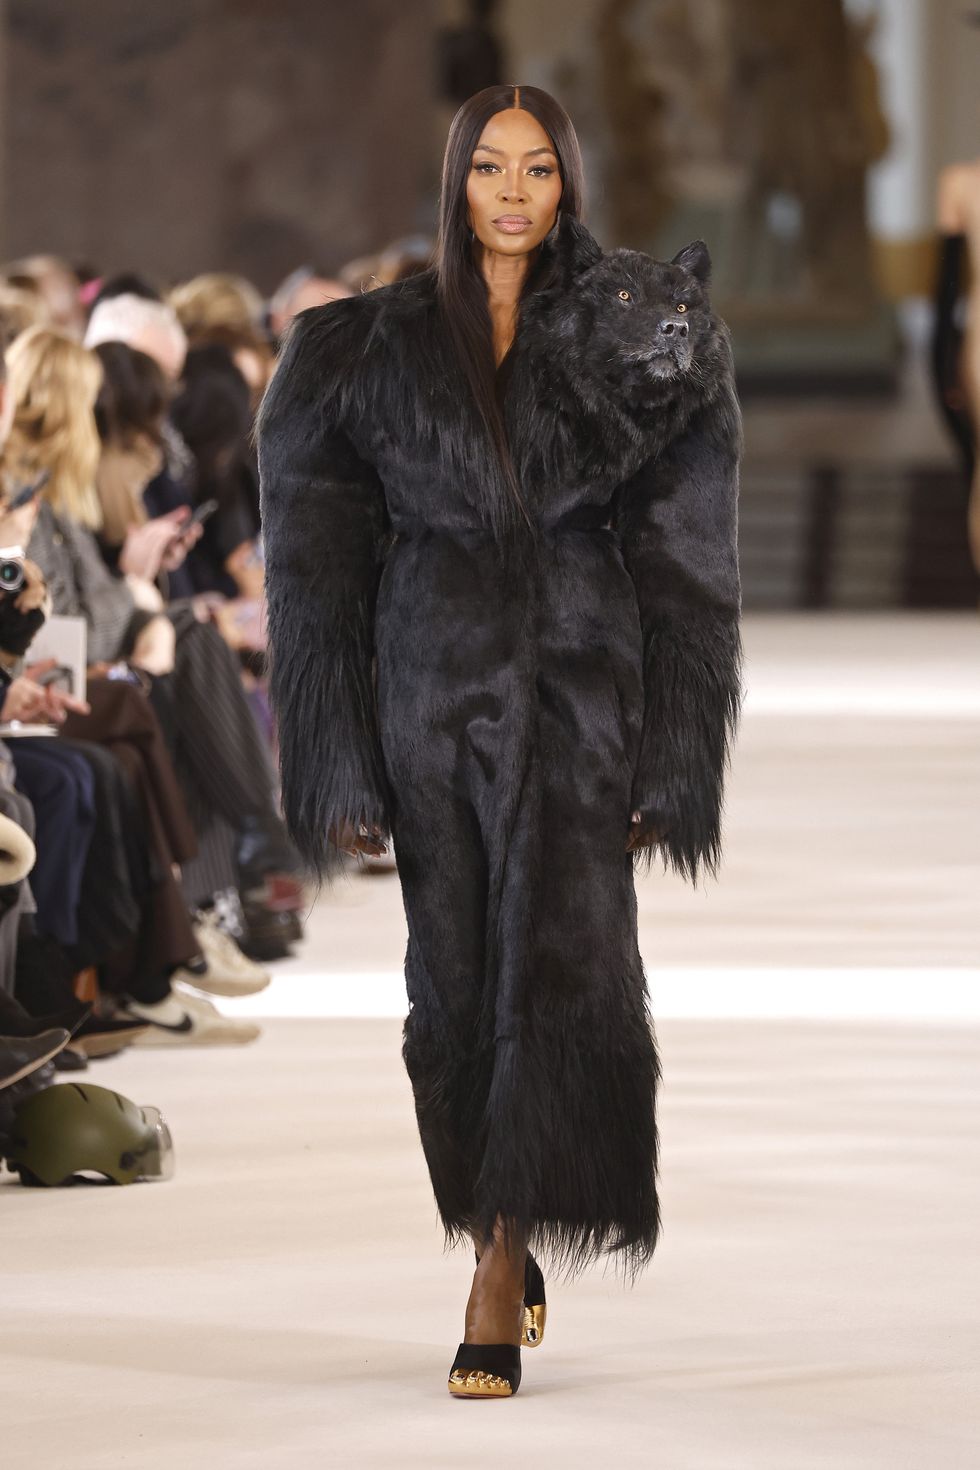 editorial use only for non editorial use please seek approval from fashion house a model naomi campbell walks the runway during the schiaparelli haute couture spring summer 2023 show as part of paris fashion week on january 23, 2023 in paris, france photo estrop by getty images